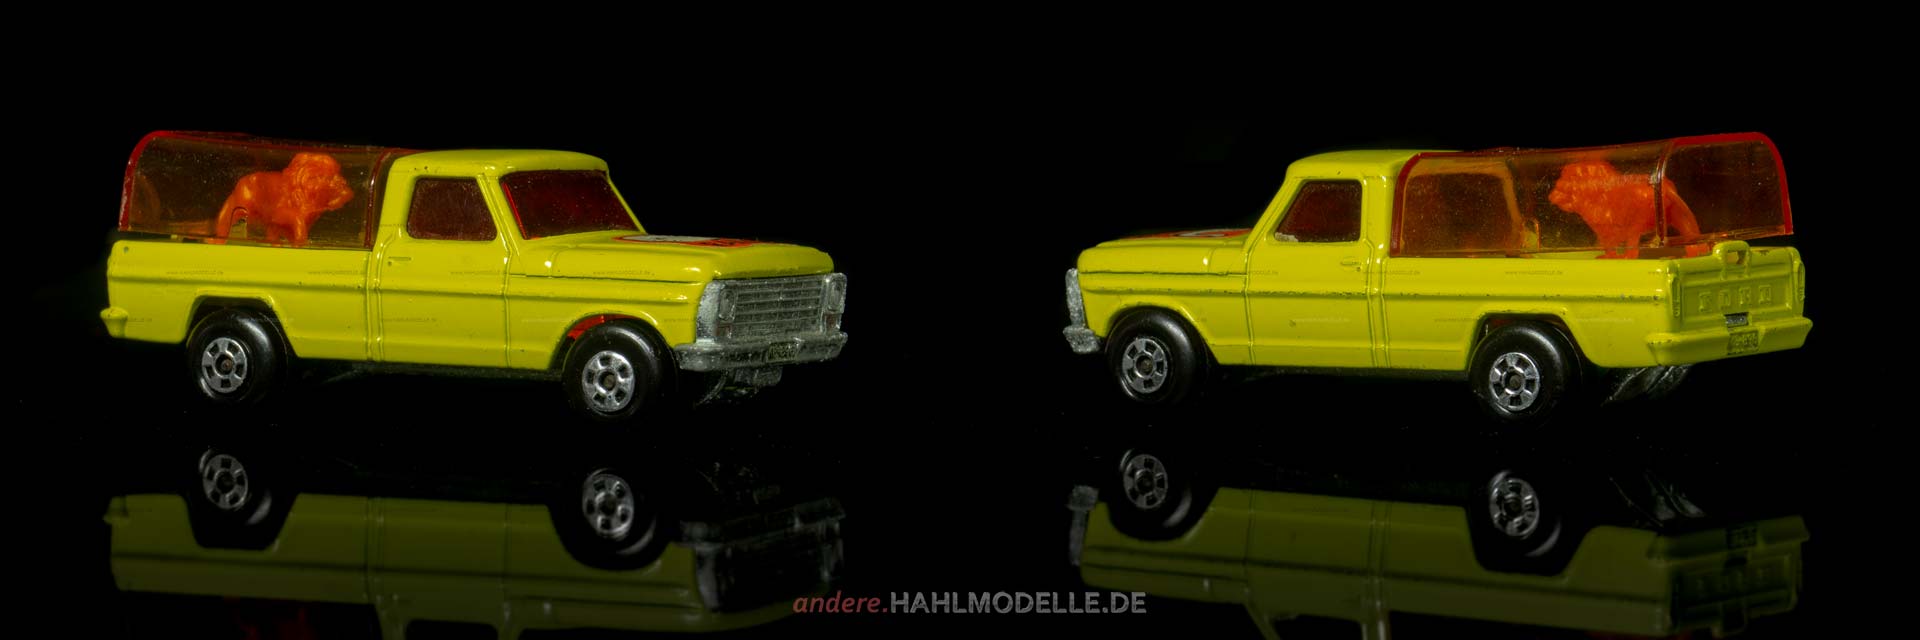 Ford F-100 | Pickup | Lesney Products & Co. Ltd. | Matchbox Rolamatics Wild Life Truck | www.andere.hahlmodelle.de